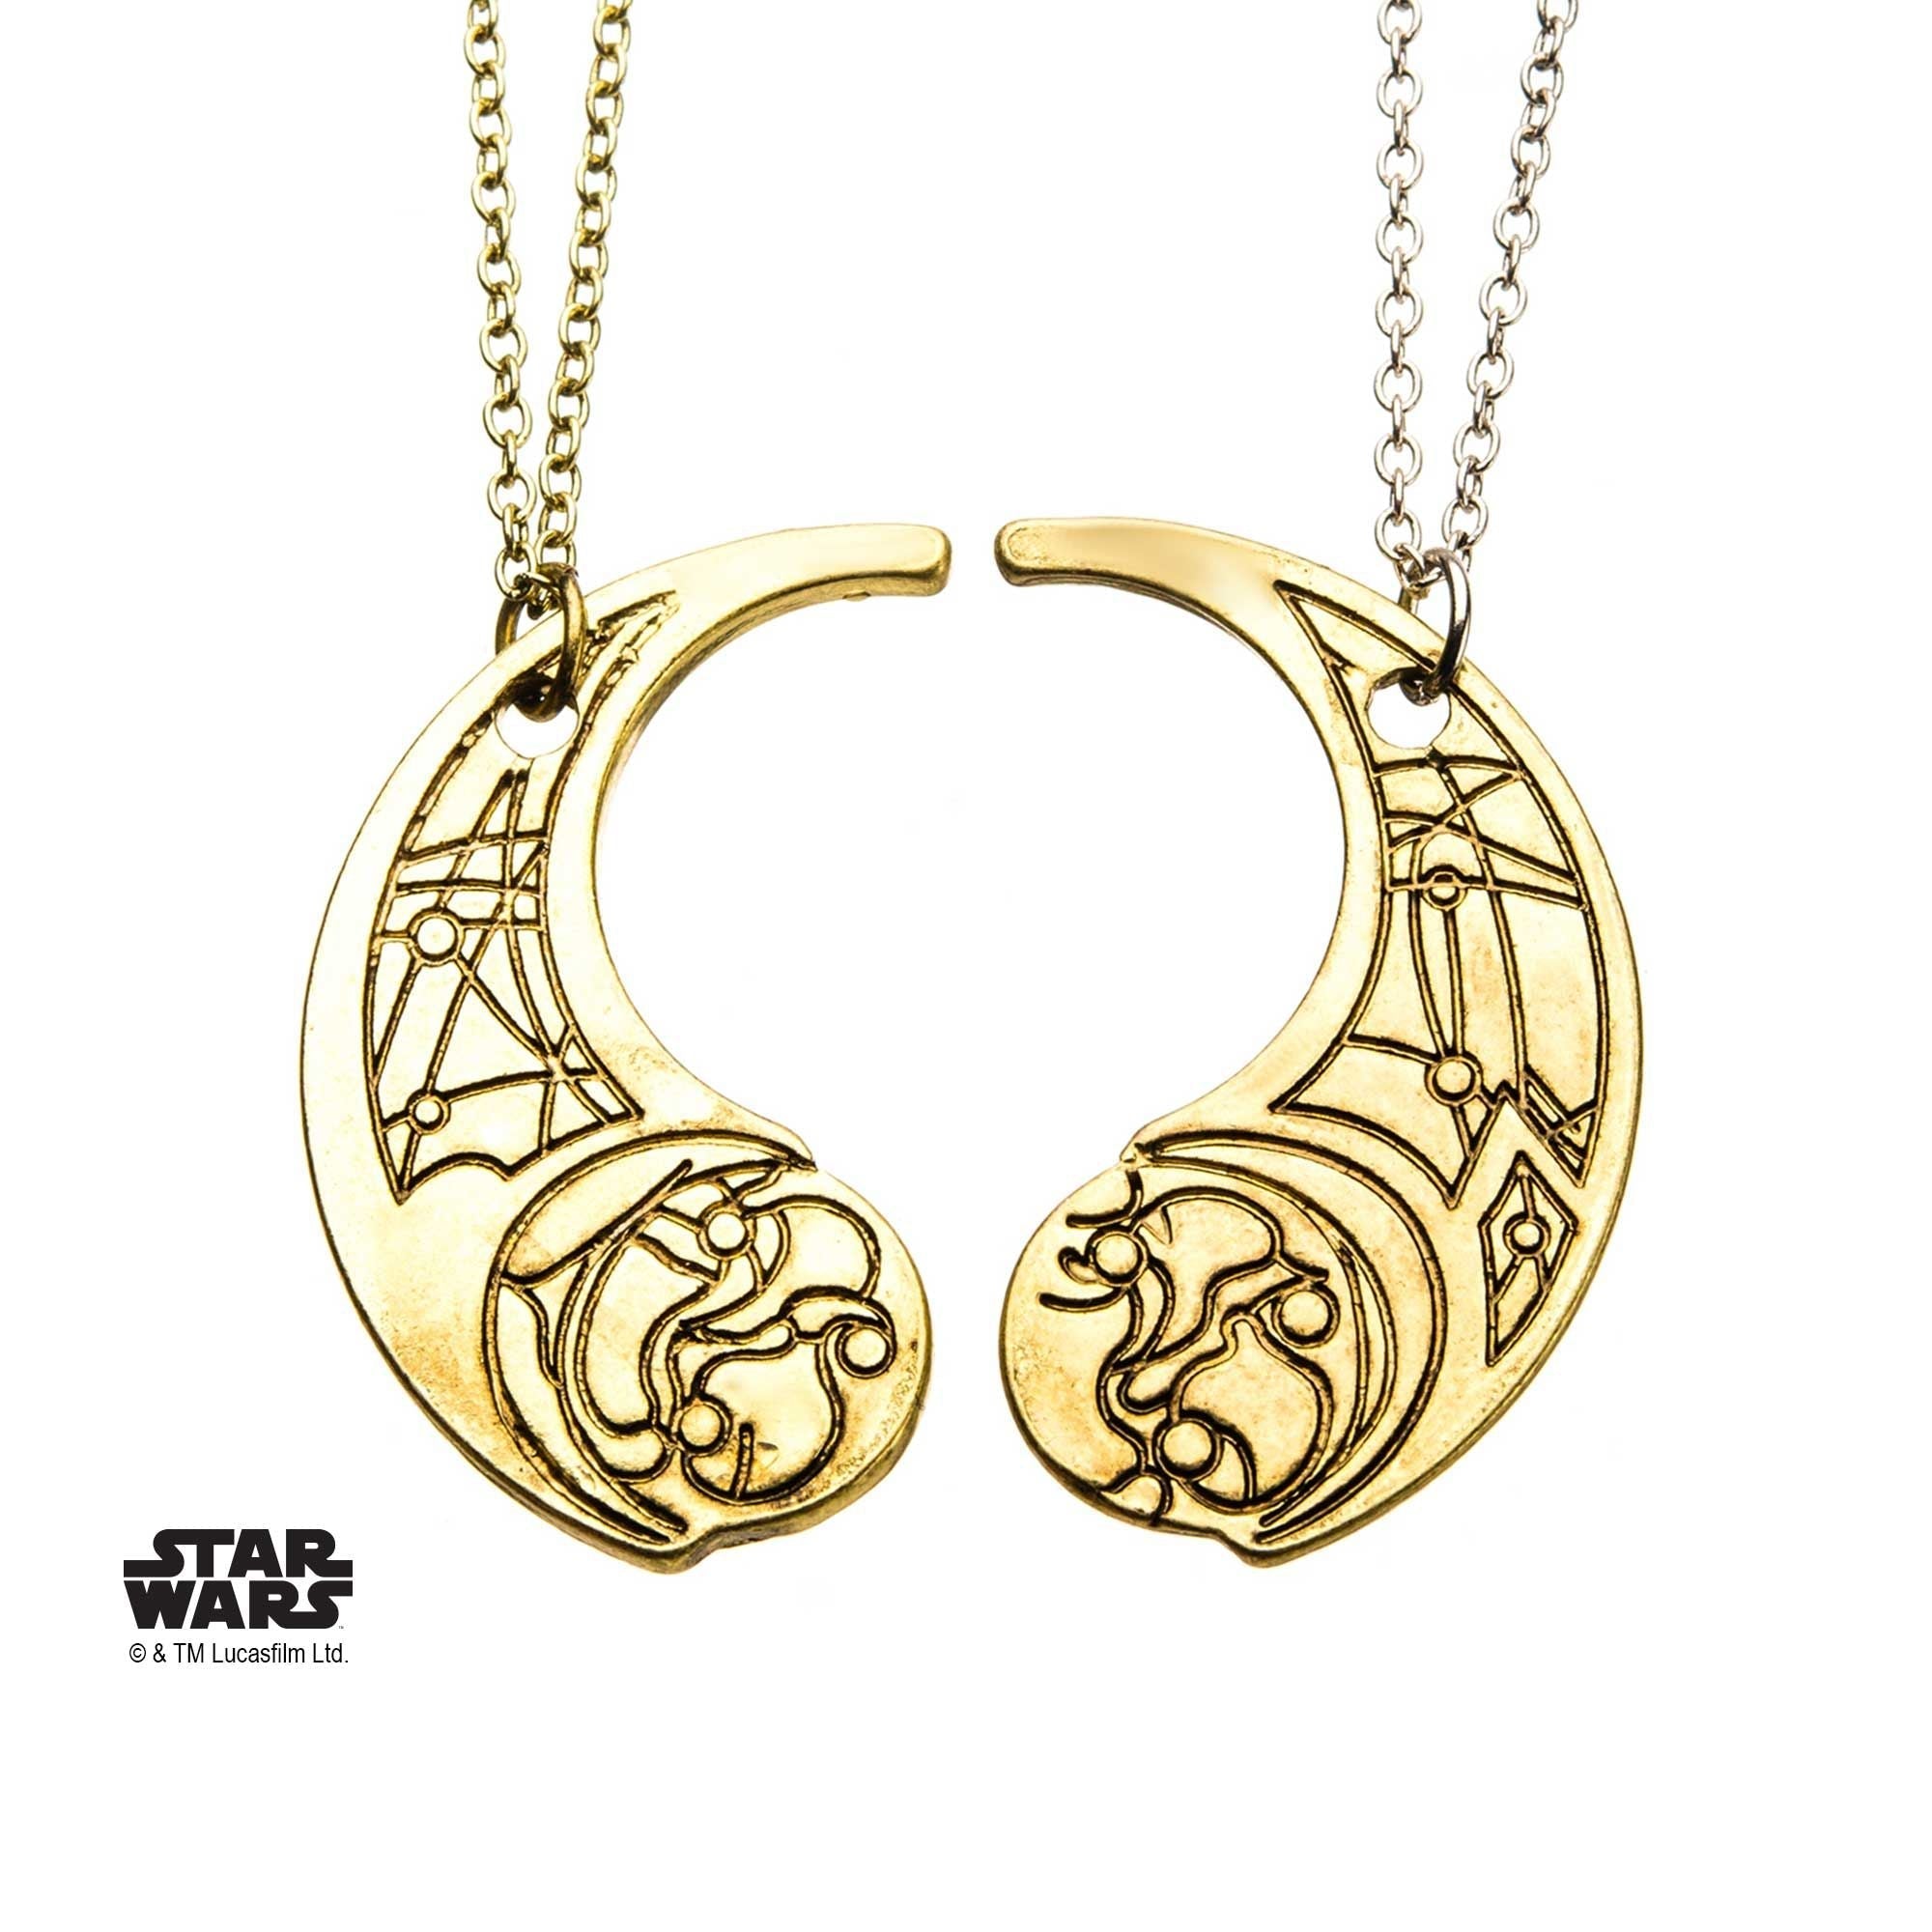 Star Wars Han Solo Gold Tone Interchangeable Charm Necklace